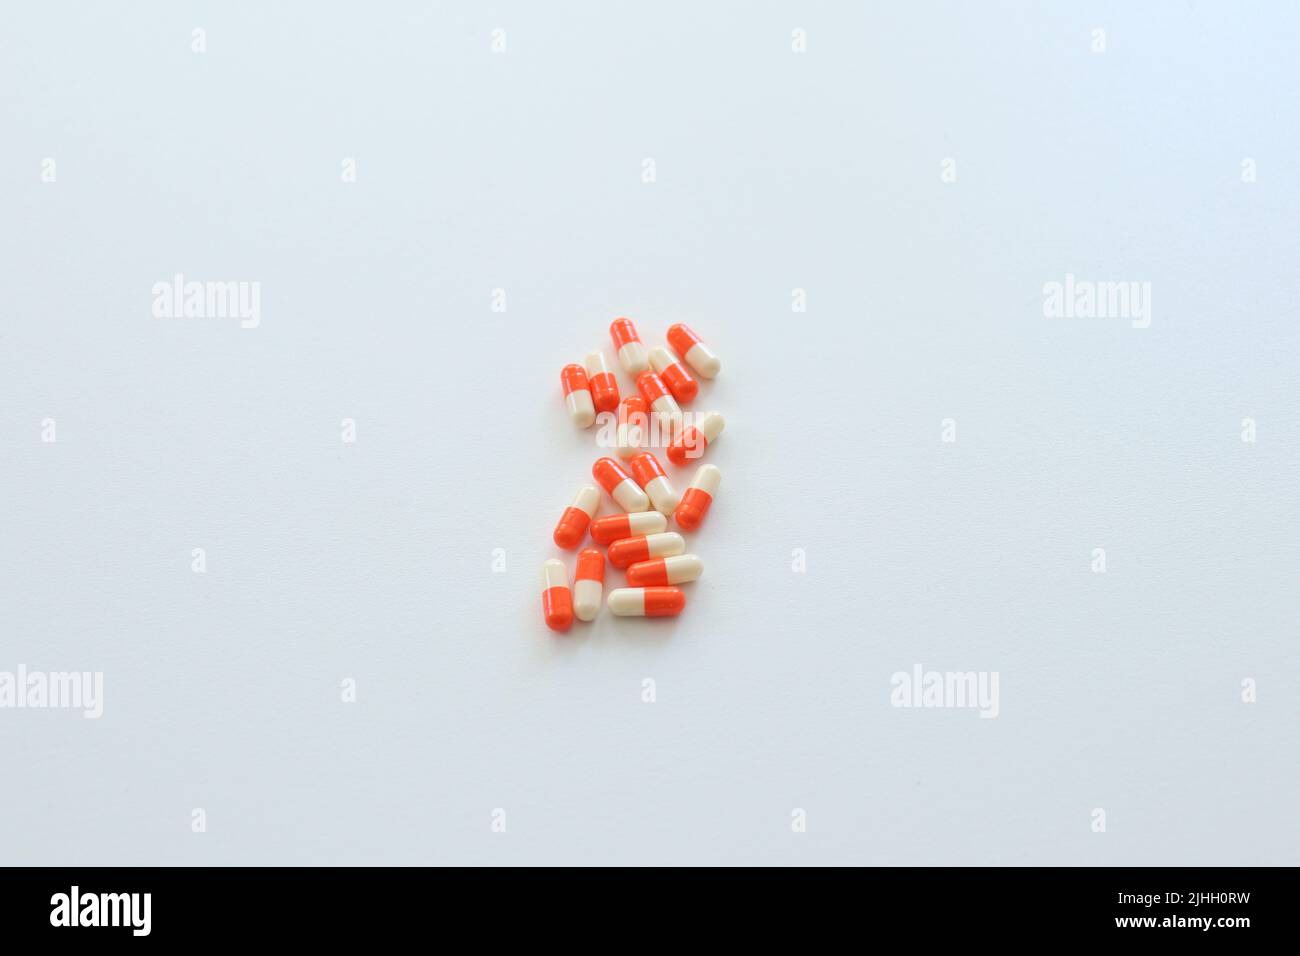 Scattered capsule pills isolated on white background. Orange and white colored drugs. Treatment method idea concept. suicidal metaphor meaning. Stock Photo